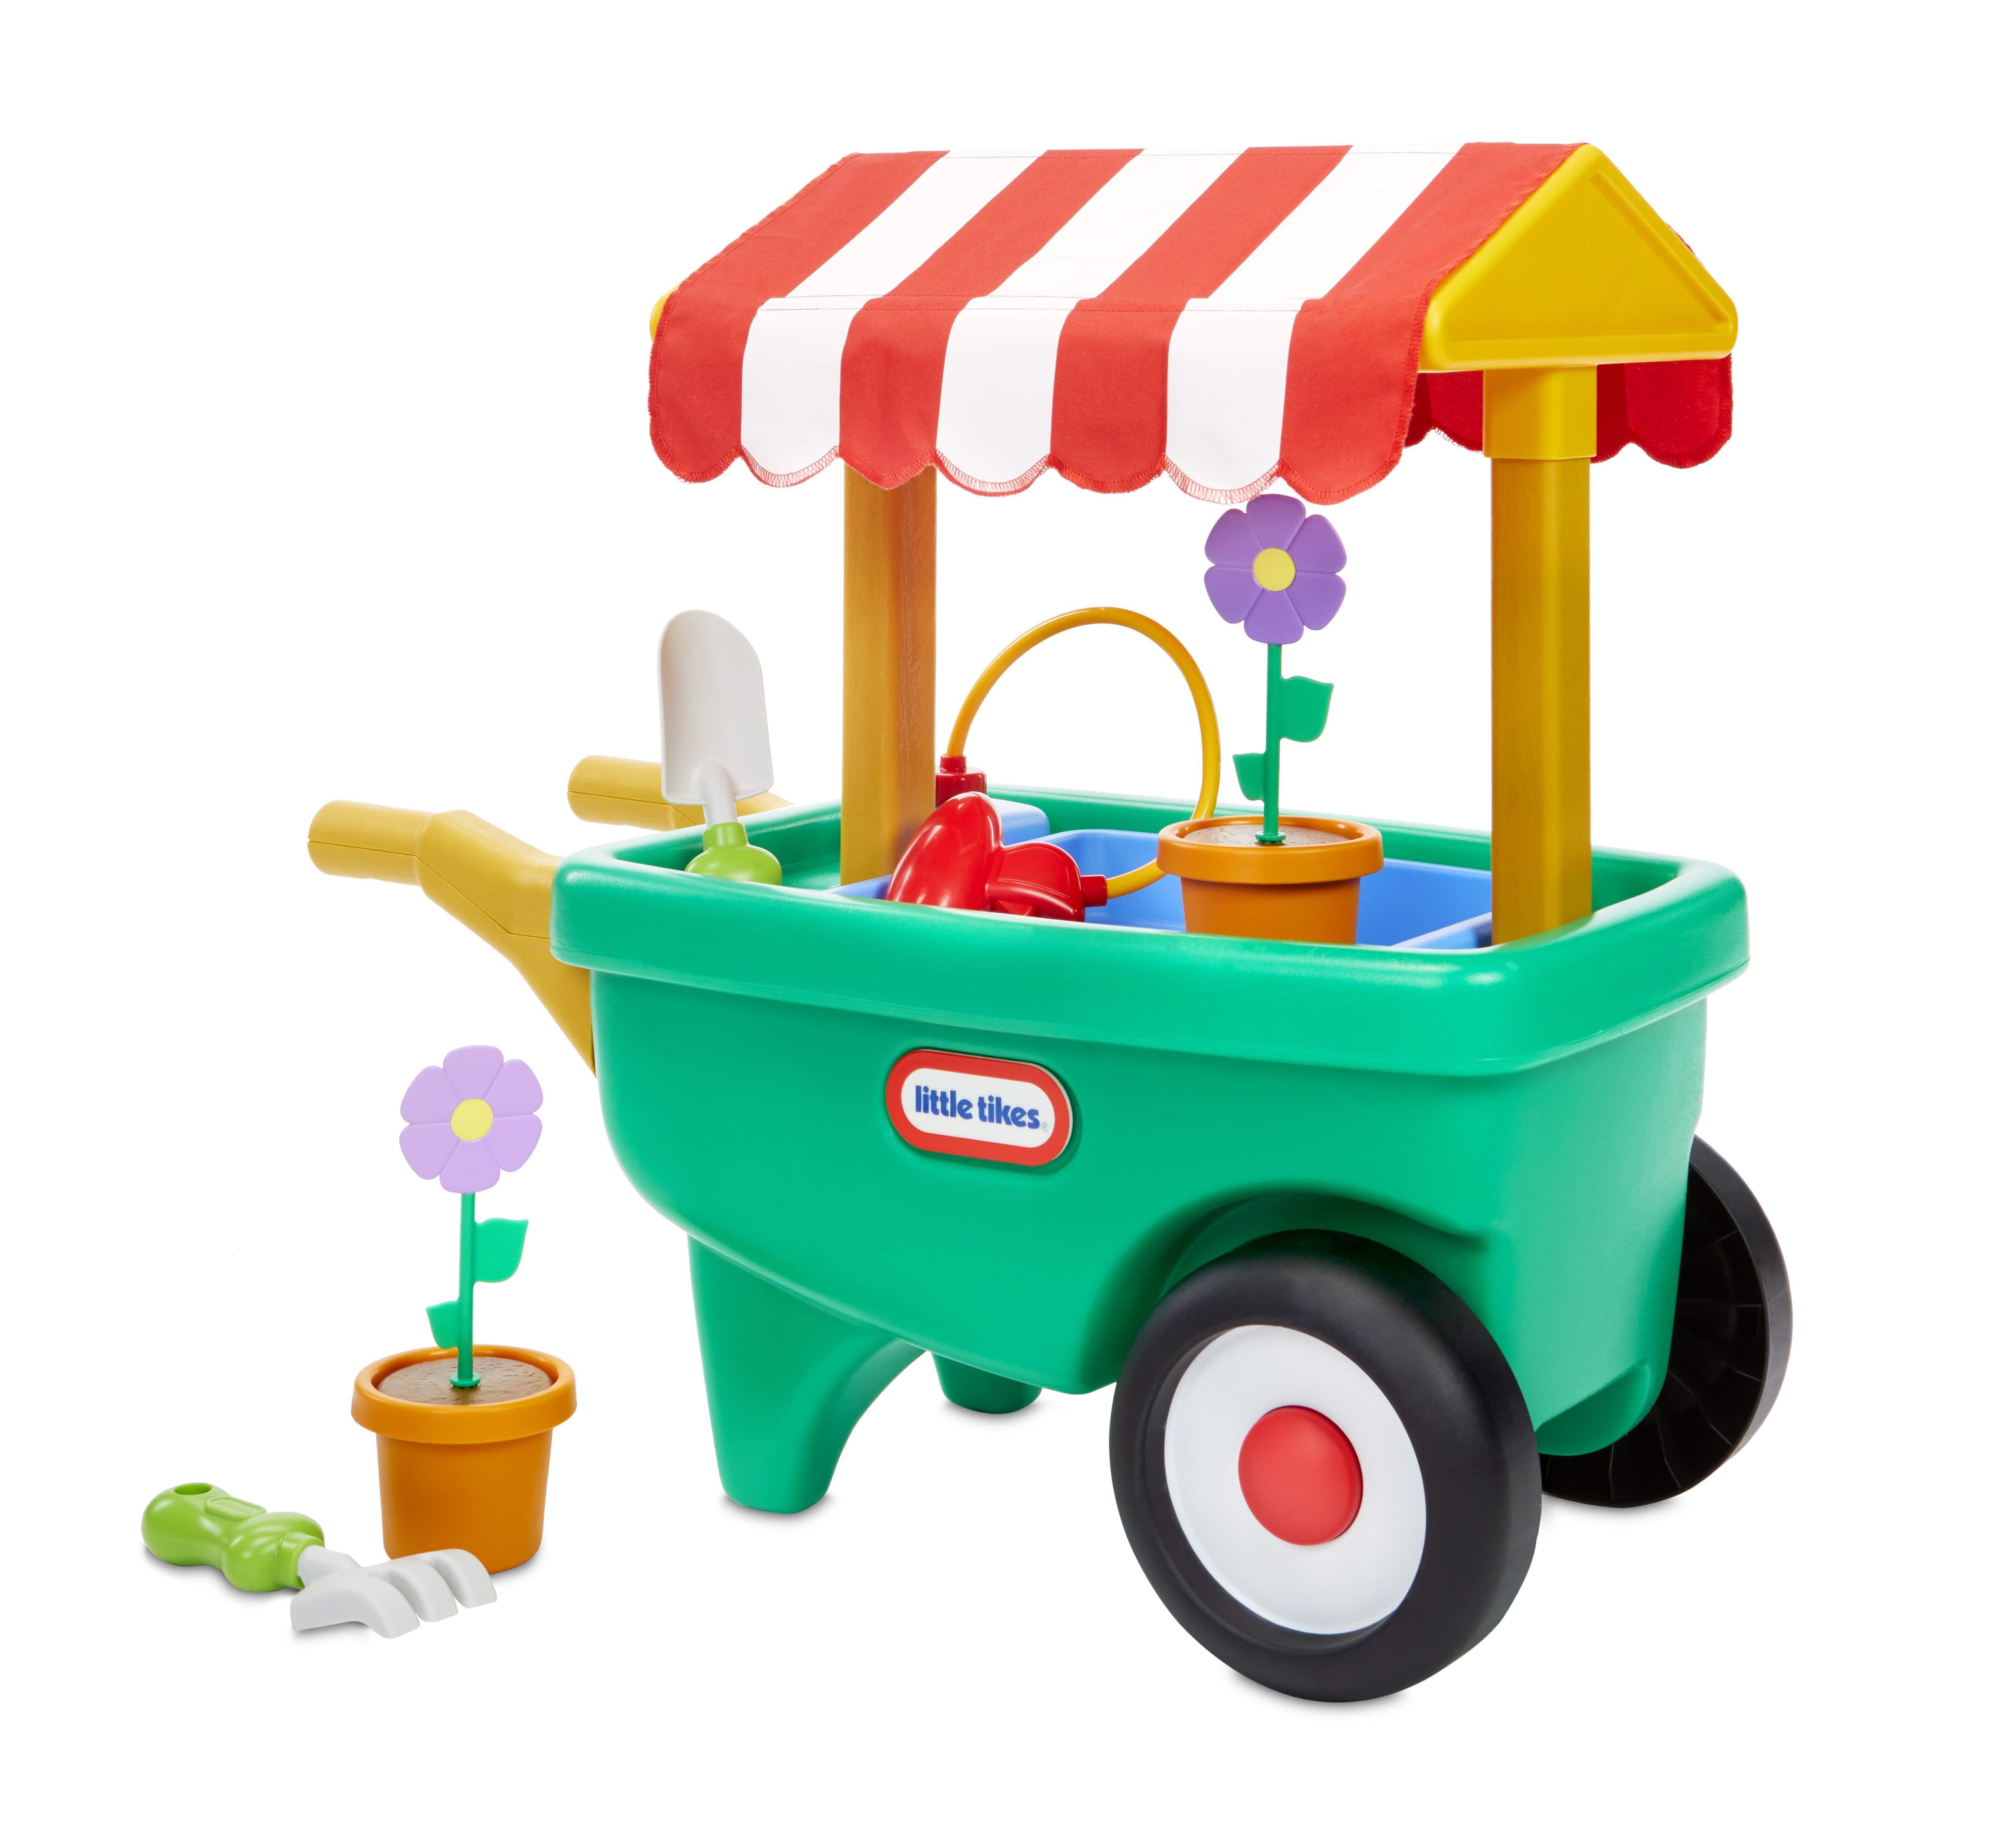 Little Tikes 2-in-1 Garden Cart & Wheelbarrow Play Gardening Toy, 10 Pieces and Sprinkler for Indoor Outdoor Preschool Pretend Play, Kids Toddlers Girls Boys Ages 2 3 4+ - image 1 of 7